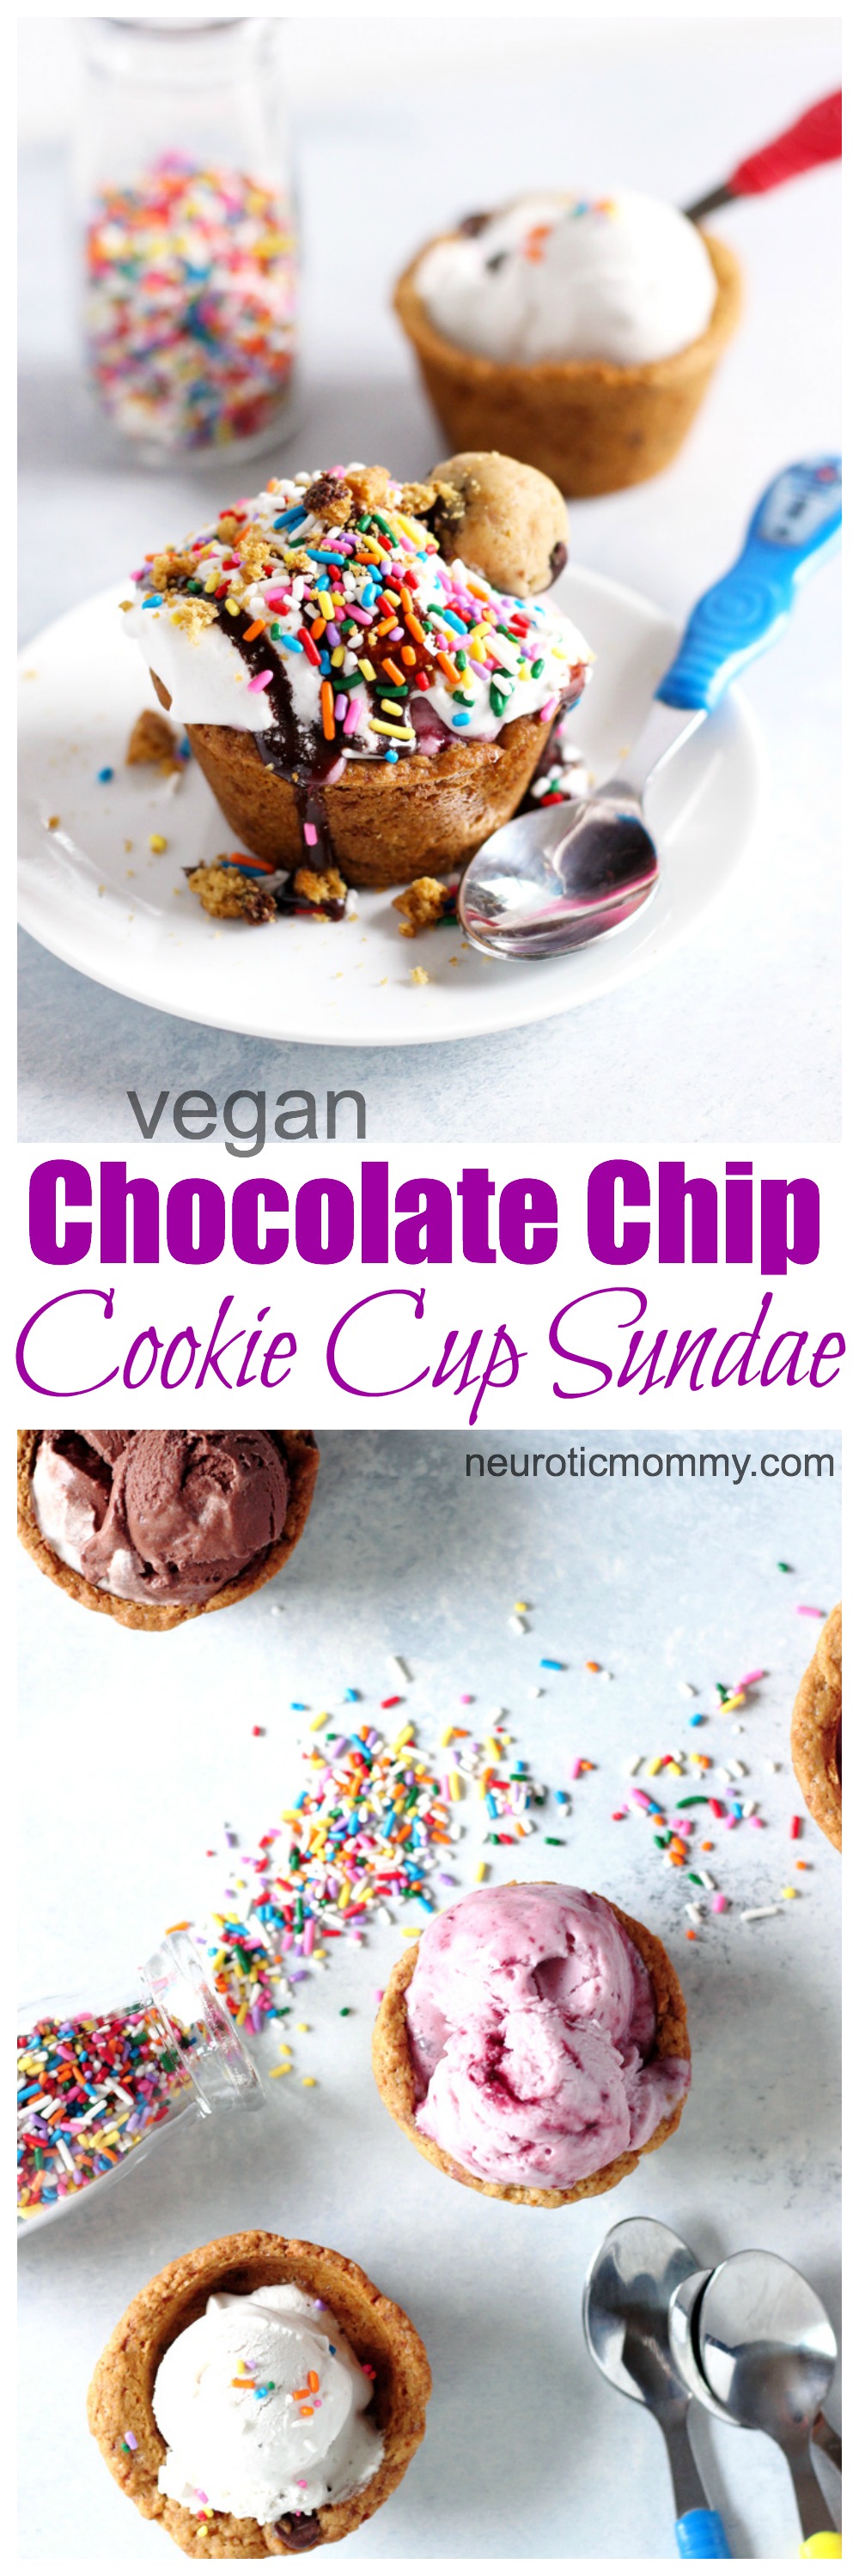 Chocolate Chip Cookie Cup Sundae - Don't settle for a measly piece of chocolate this year when you can have this! Have fun and get romantic with these chocolate chip cookie cups. Topped with #vegan ice cream and chocolate sauce...you don't want to miss out. Super easy to make! NeuroticMommy.com #desserts #valentinesday